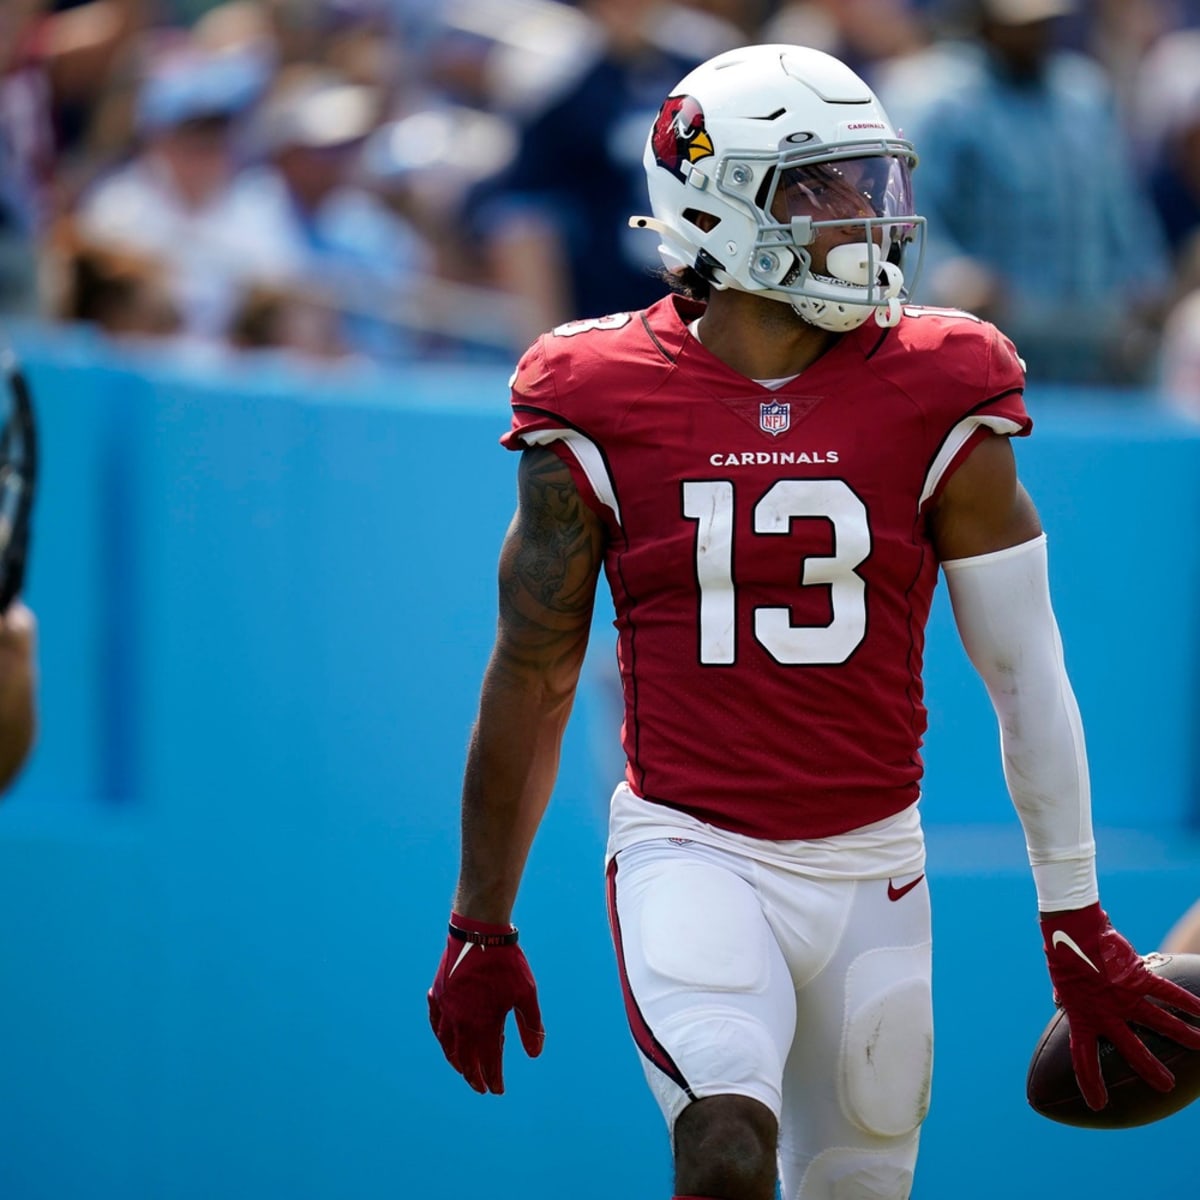 Jaguars open free agency by adding WR Christian Kirk, and make